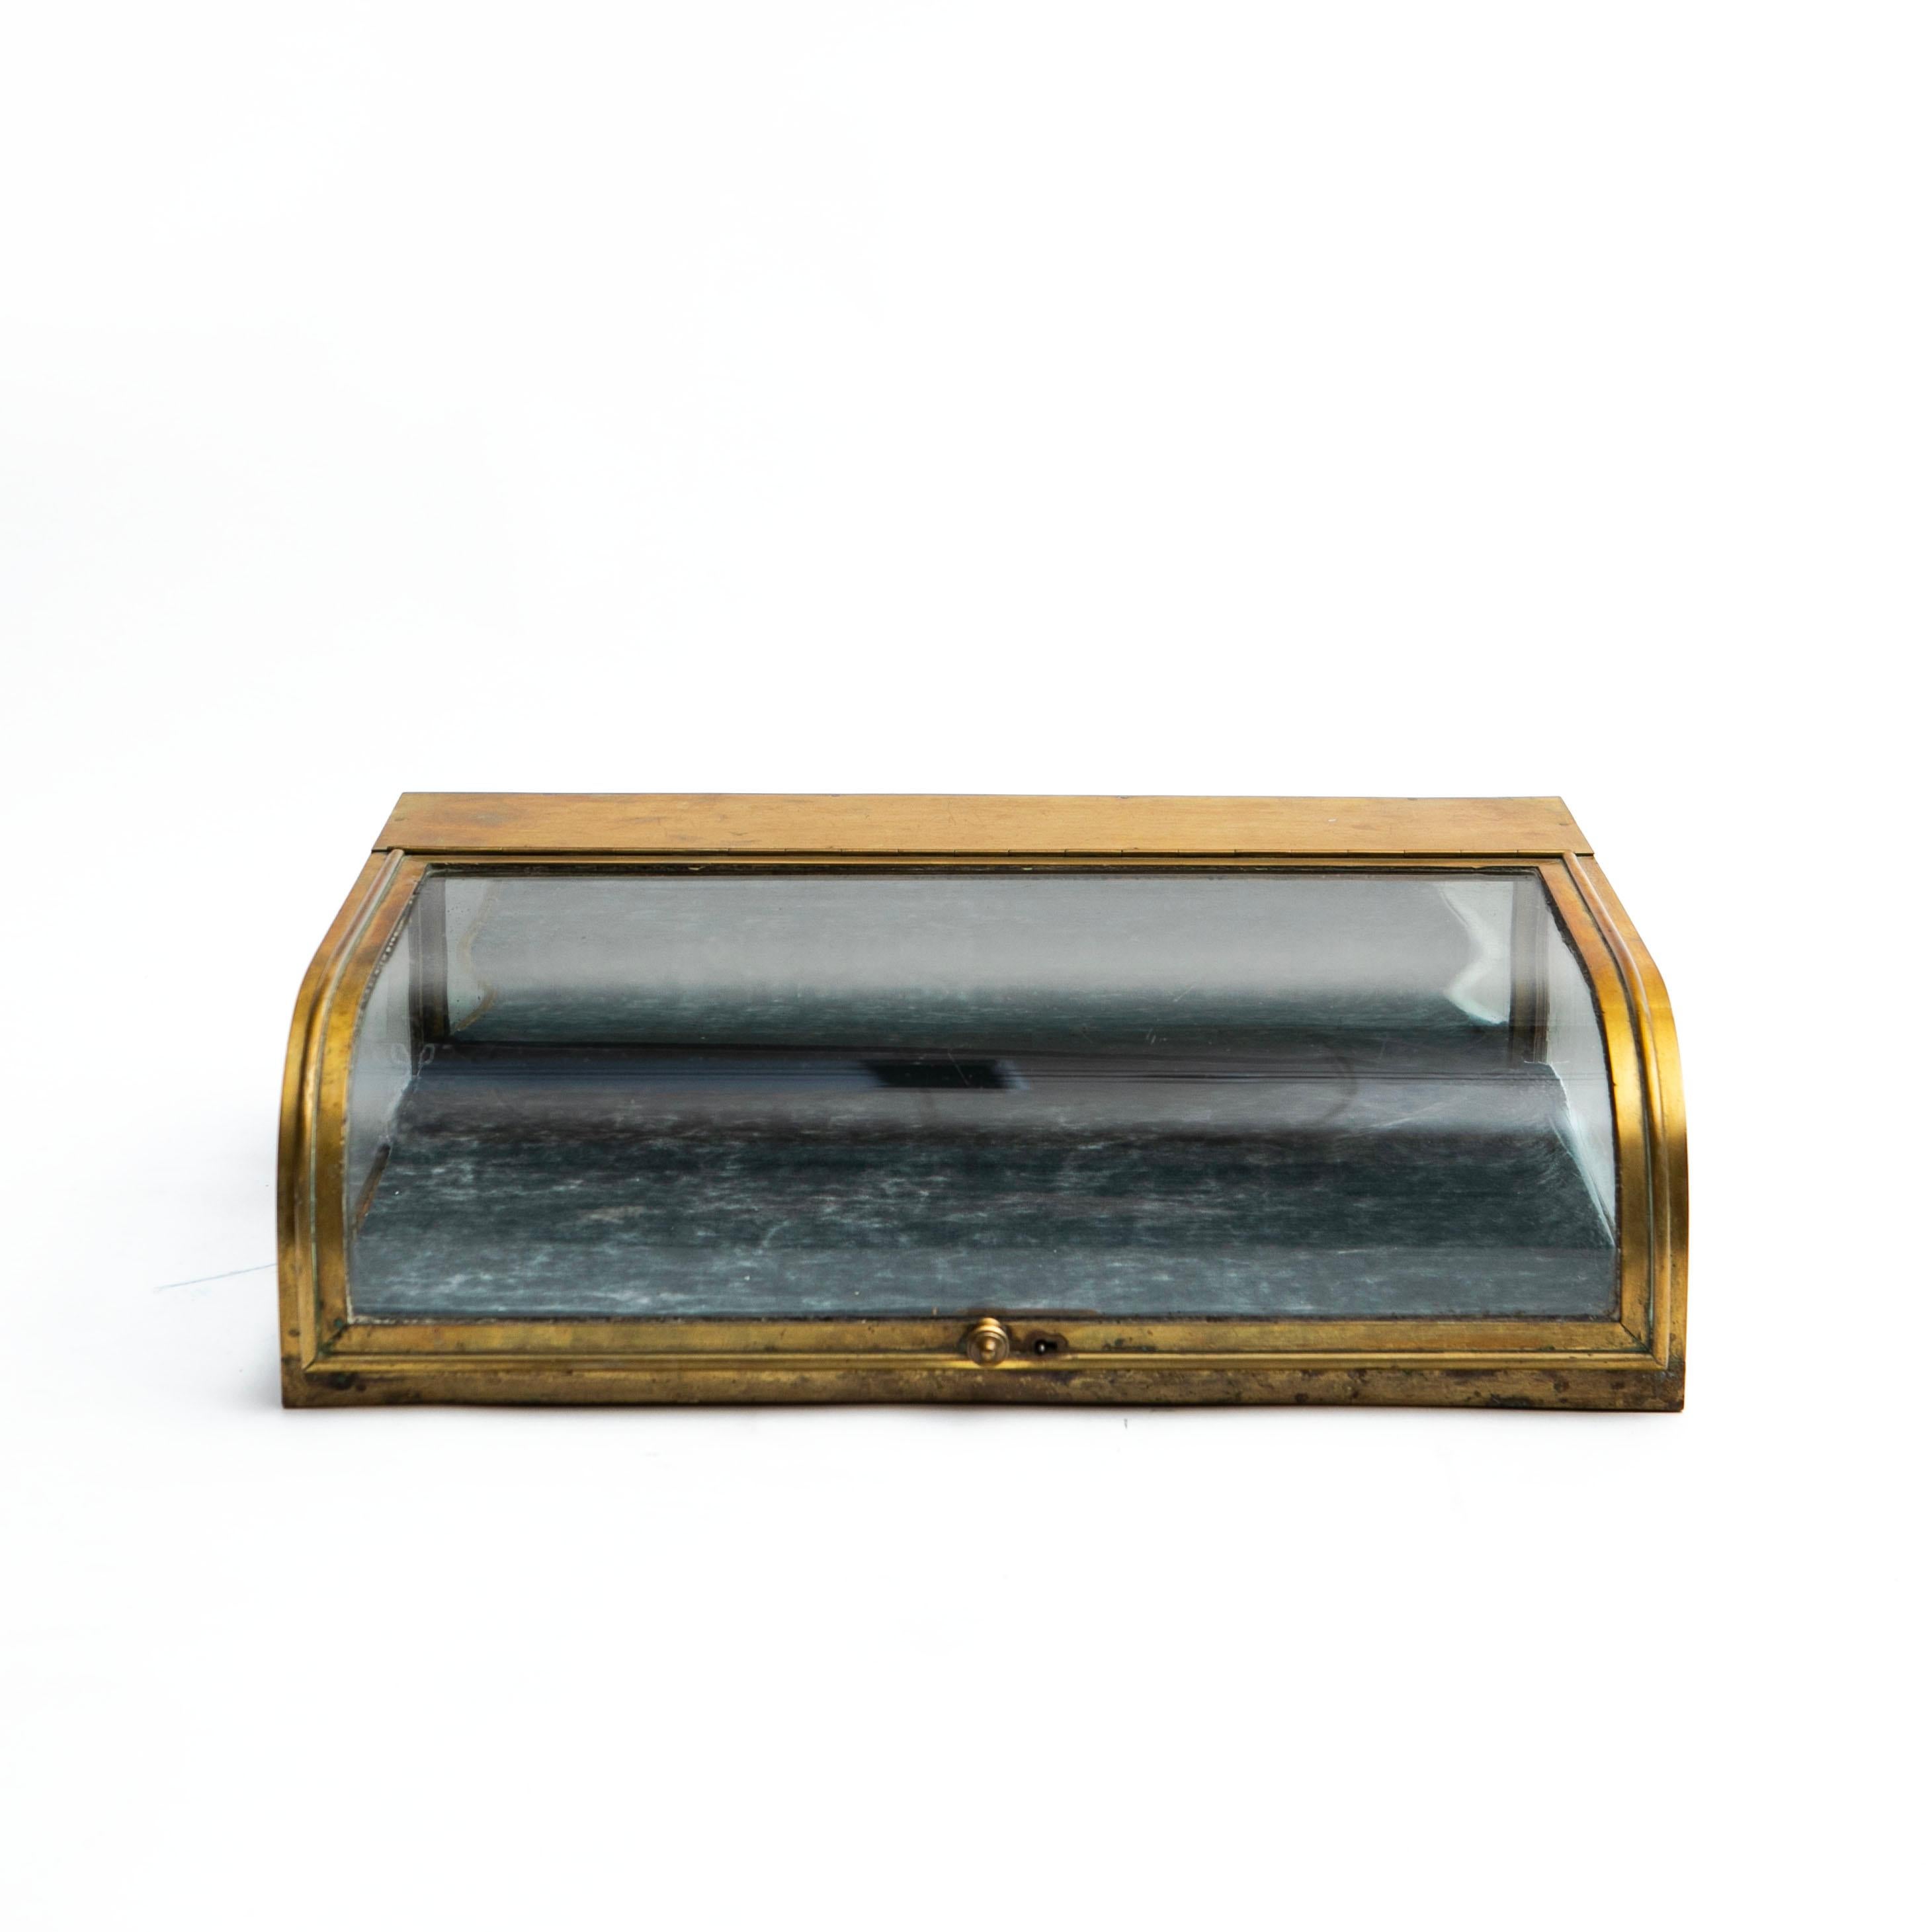 French art deco table display case / montre, made of glass and quality brass.
Brass frame with classic curved glass door and glass sides.
The bottom is covered with velour (this can be easily replaced).

In untouched good condition with natural